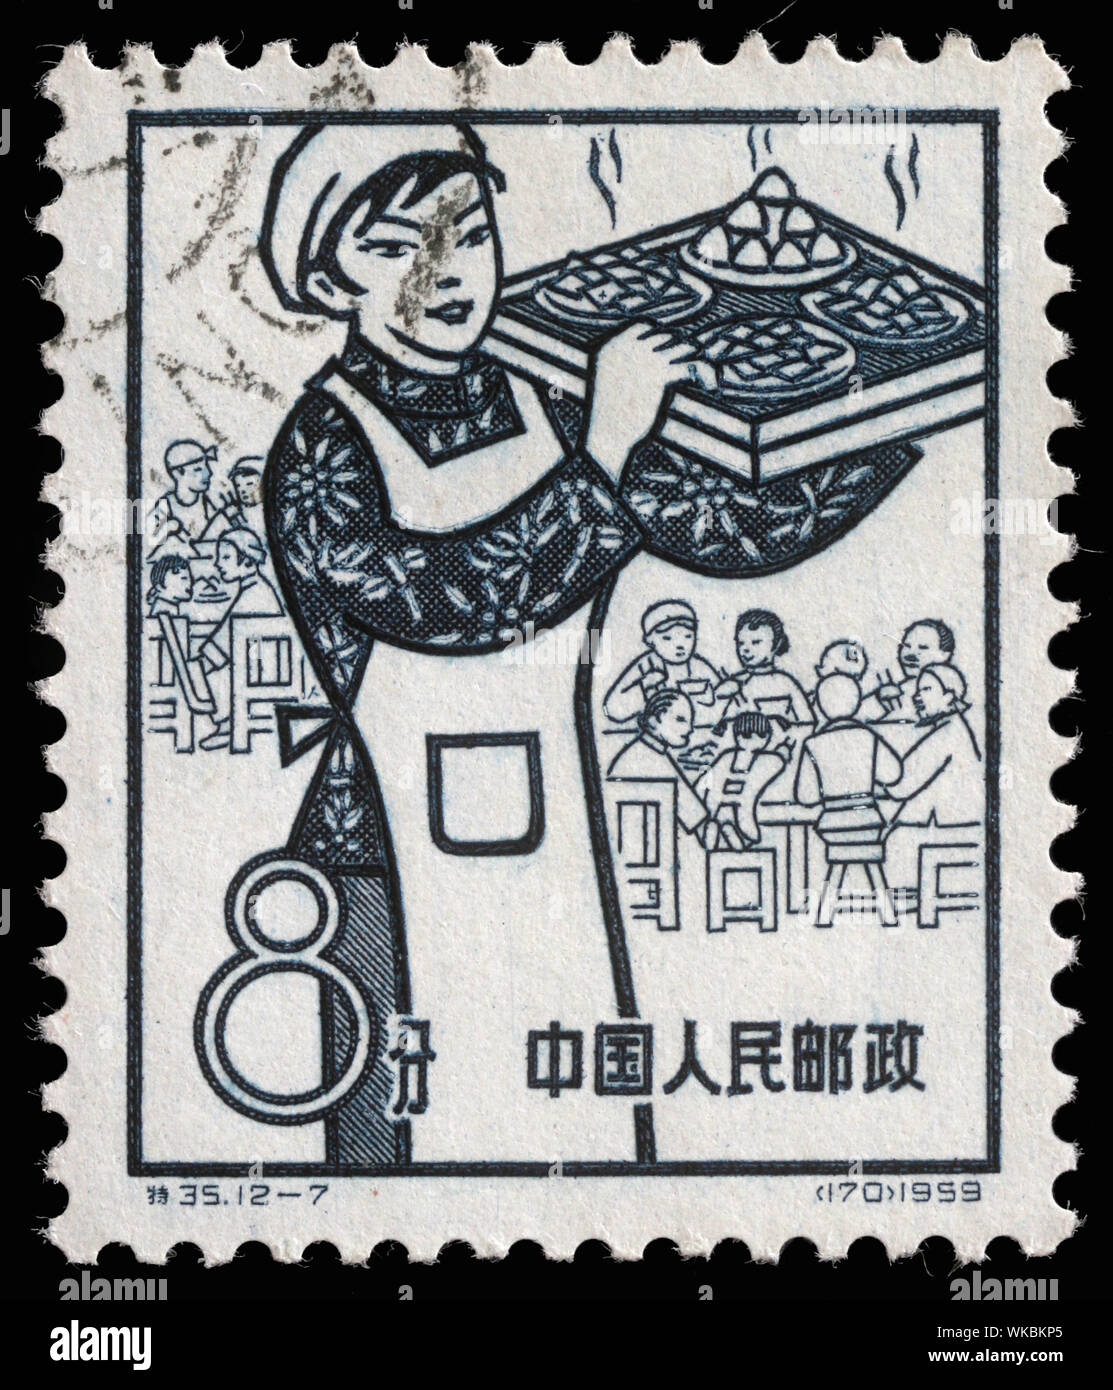 Stamp issued in the China shows dining, the 1st Anniversary of People's Communes, circa 1959. Stock Photo